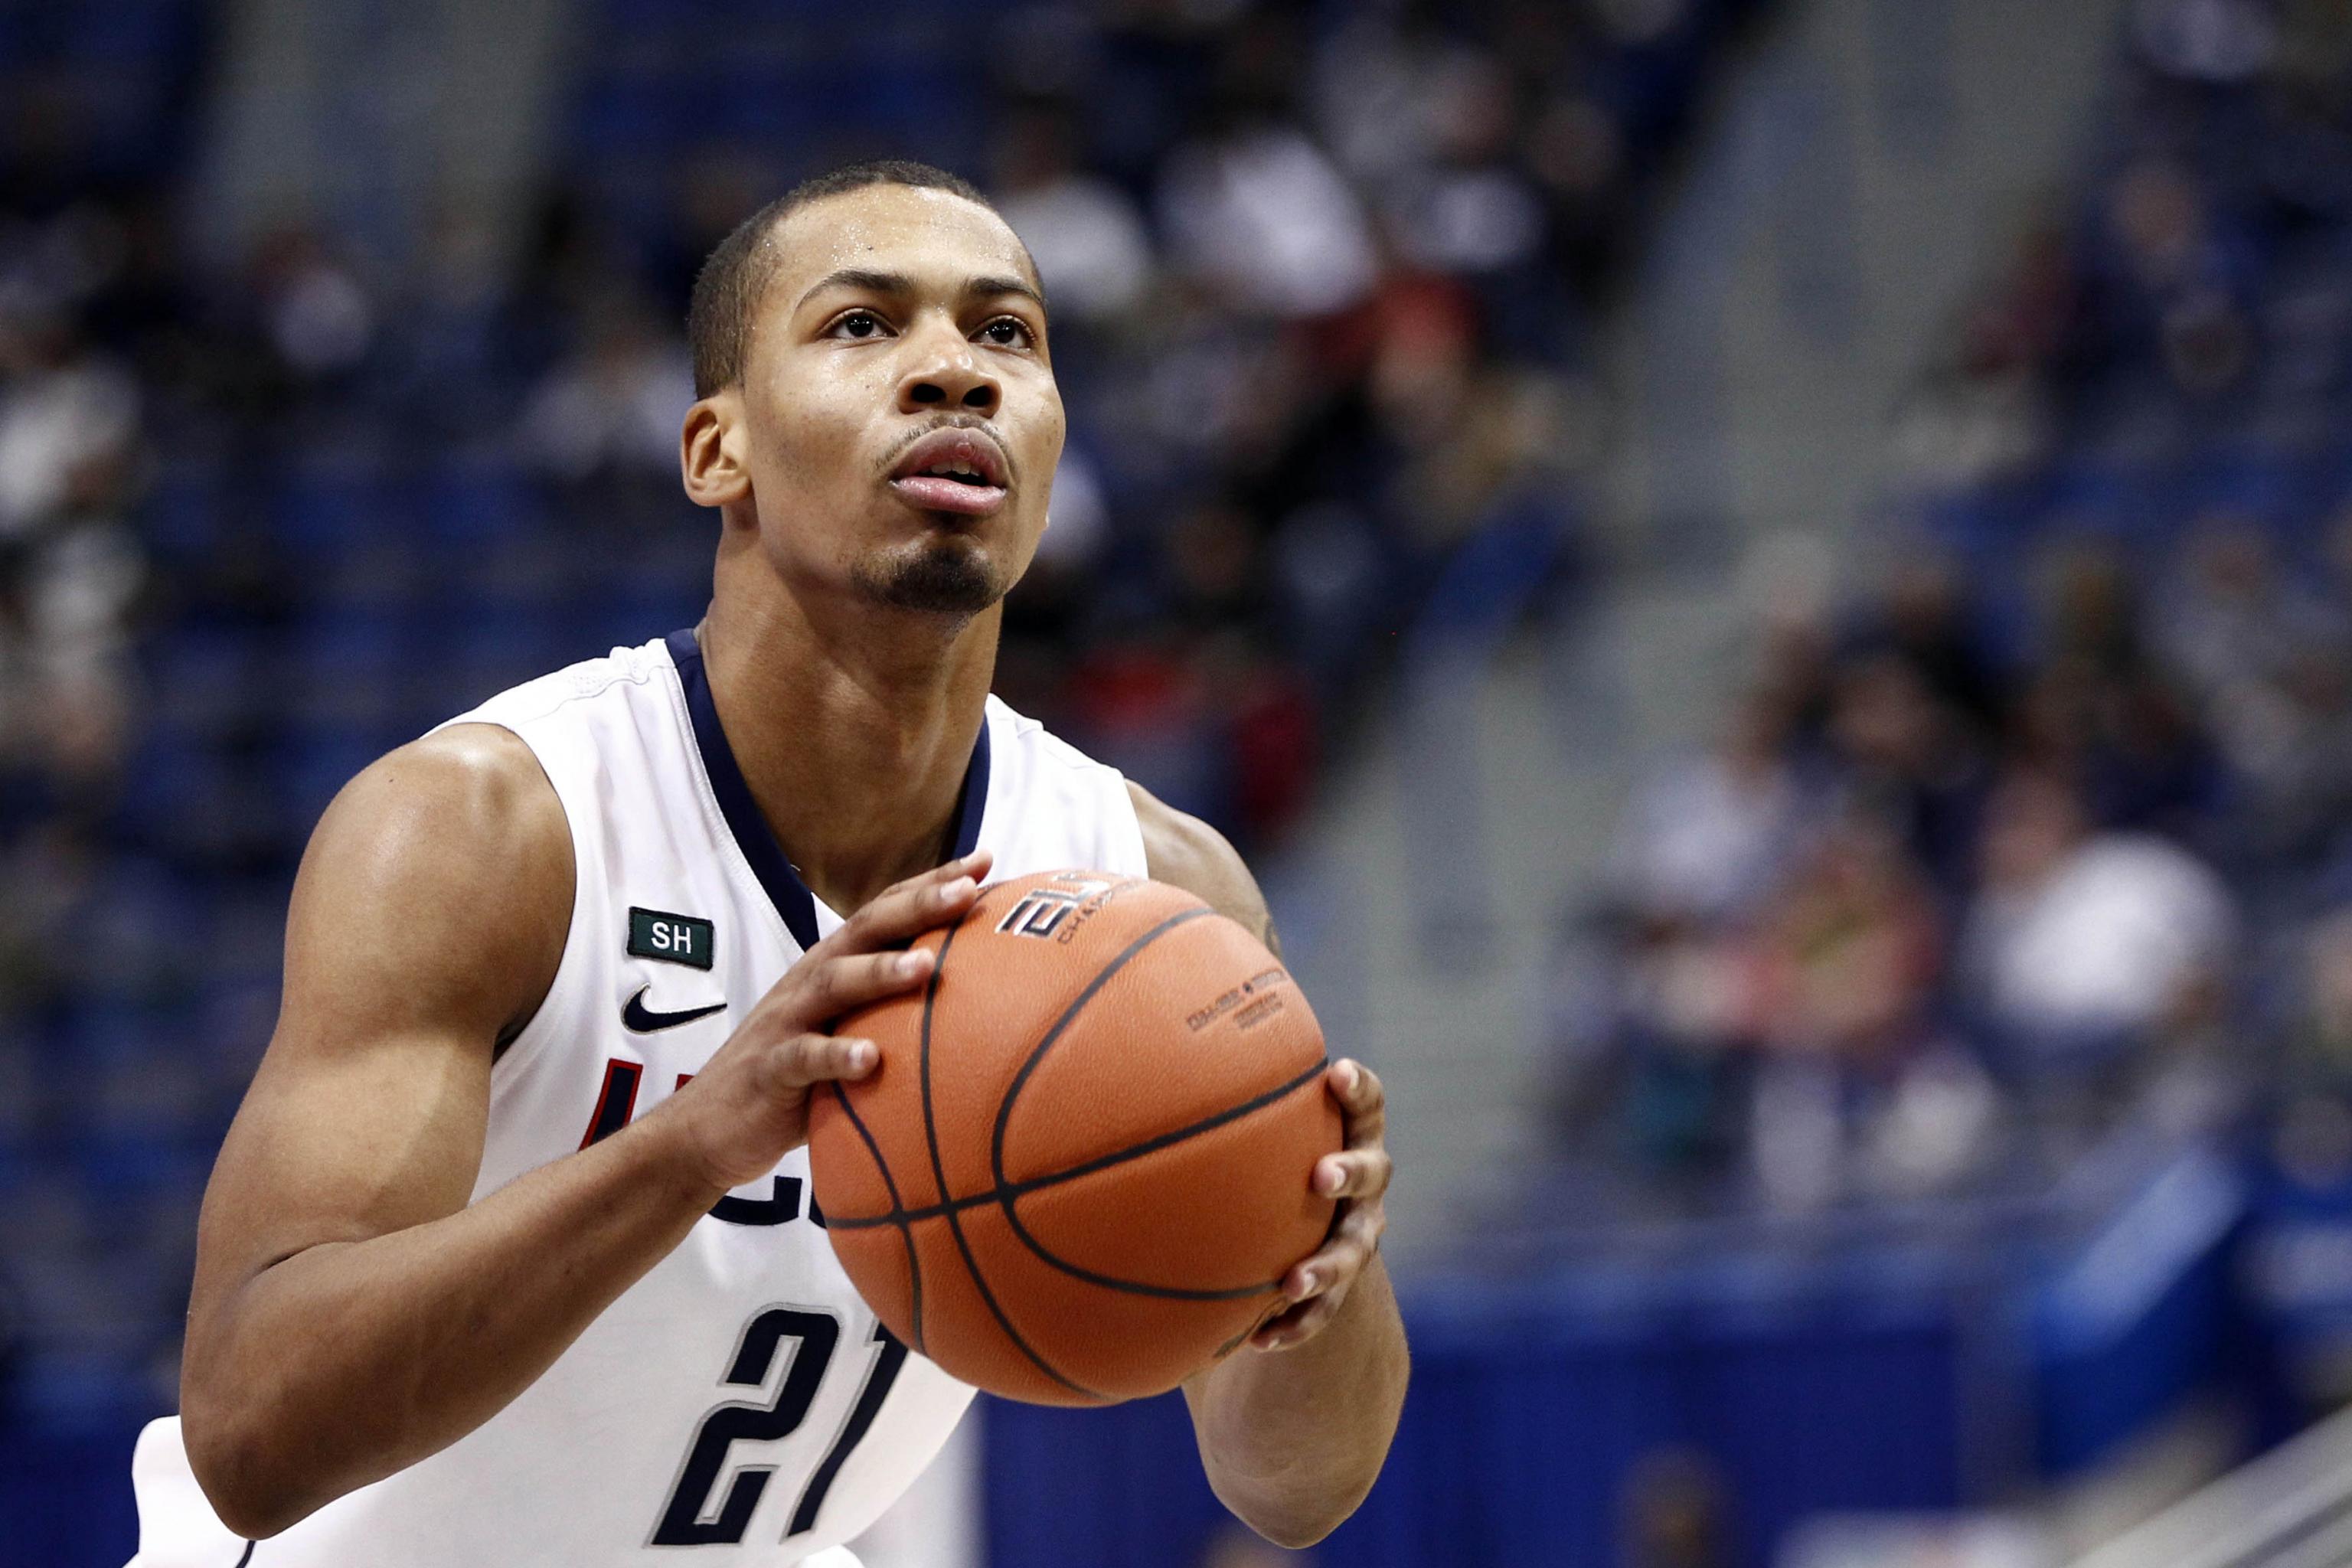 UConn Basketball: Why Omar Calhoun Is the Future for the Huskies | Bleacher  Report | Latest News, Videos and Highlights